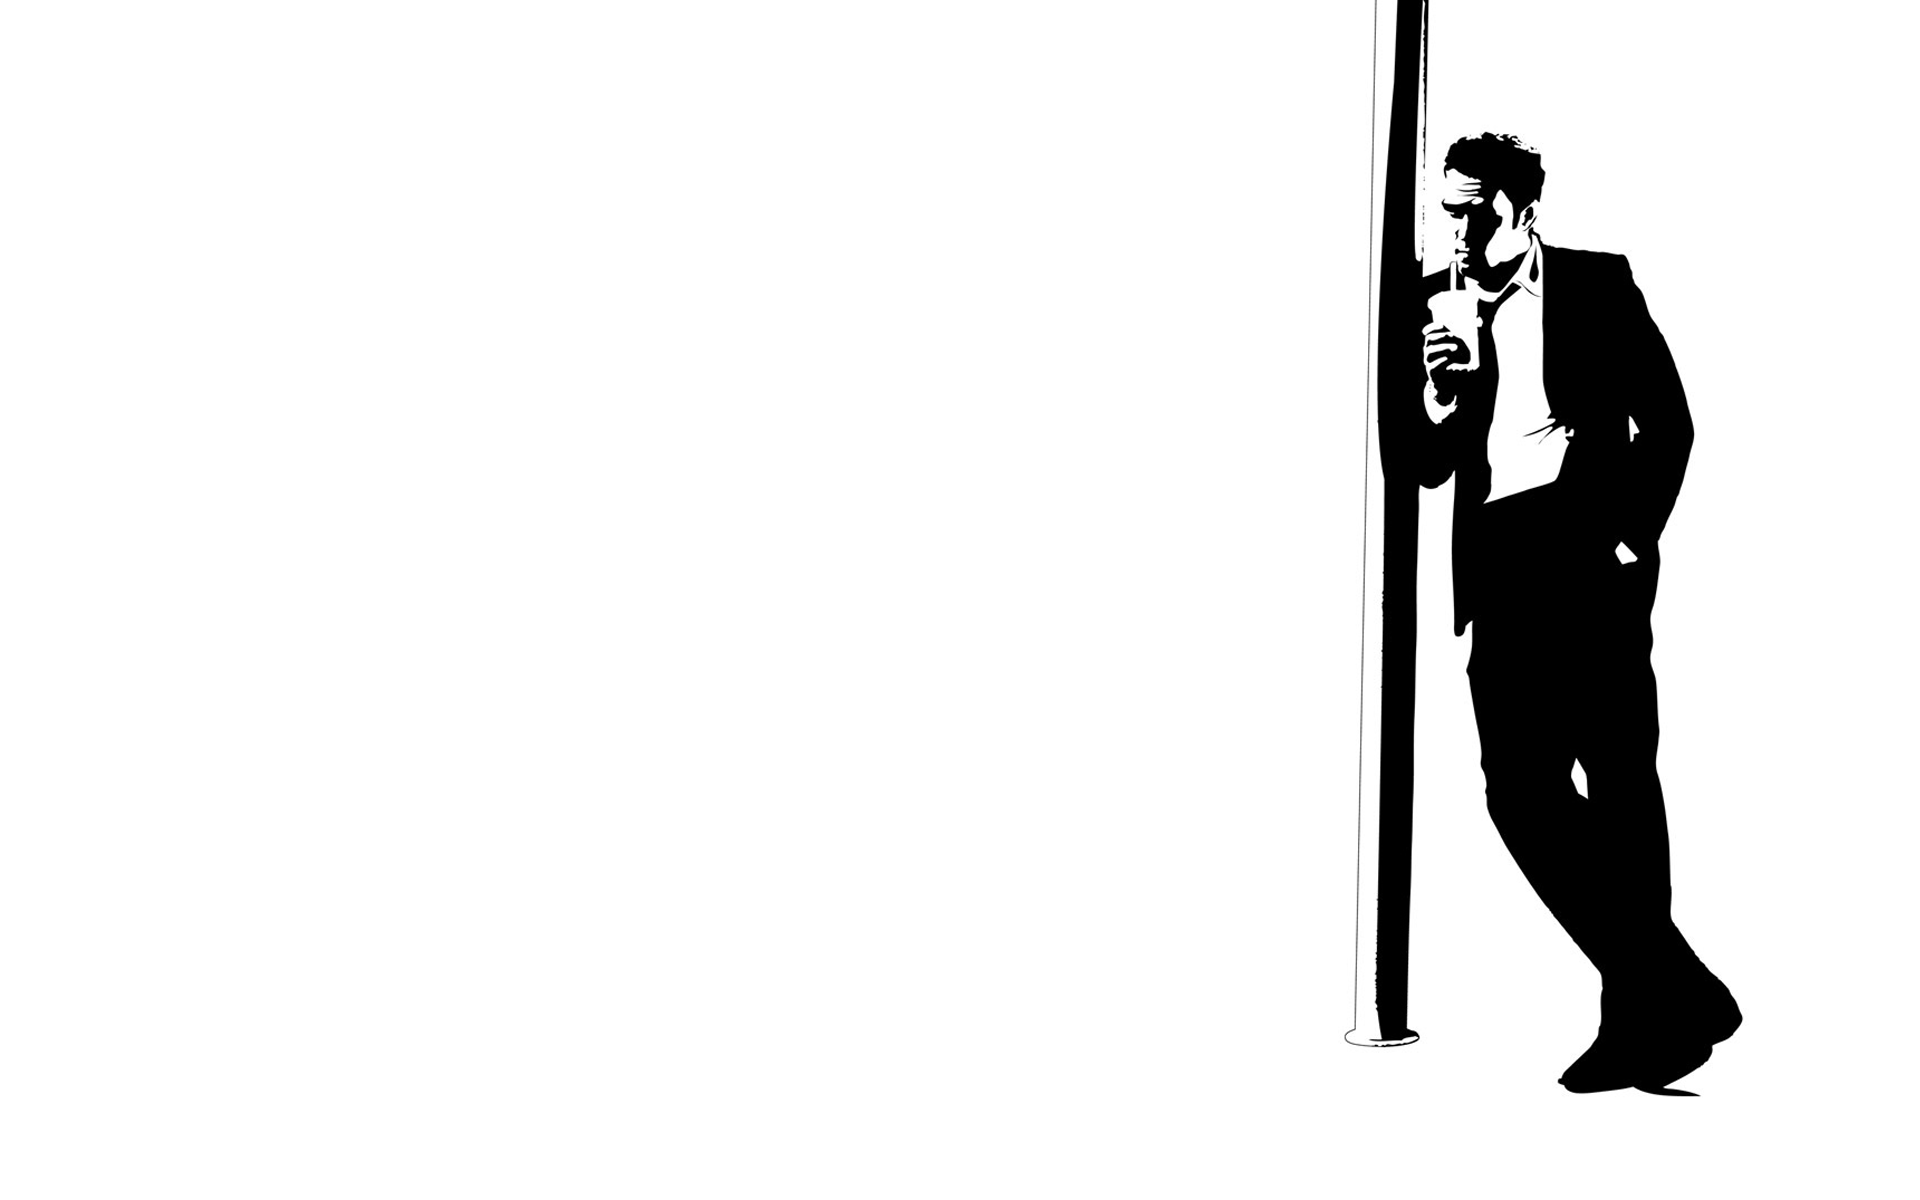 You Can Reservoir Dogs Black And White Wallpaper In Your